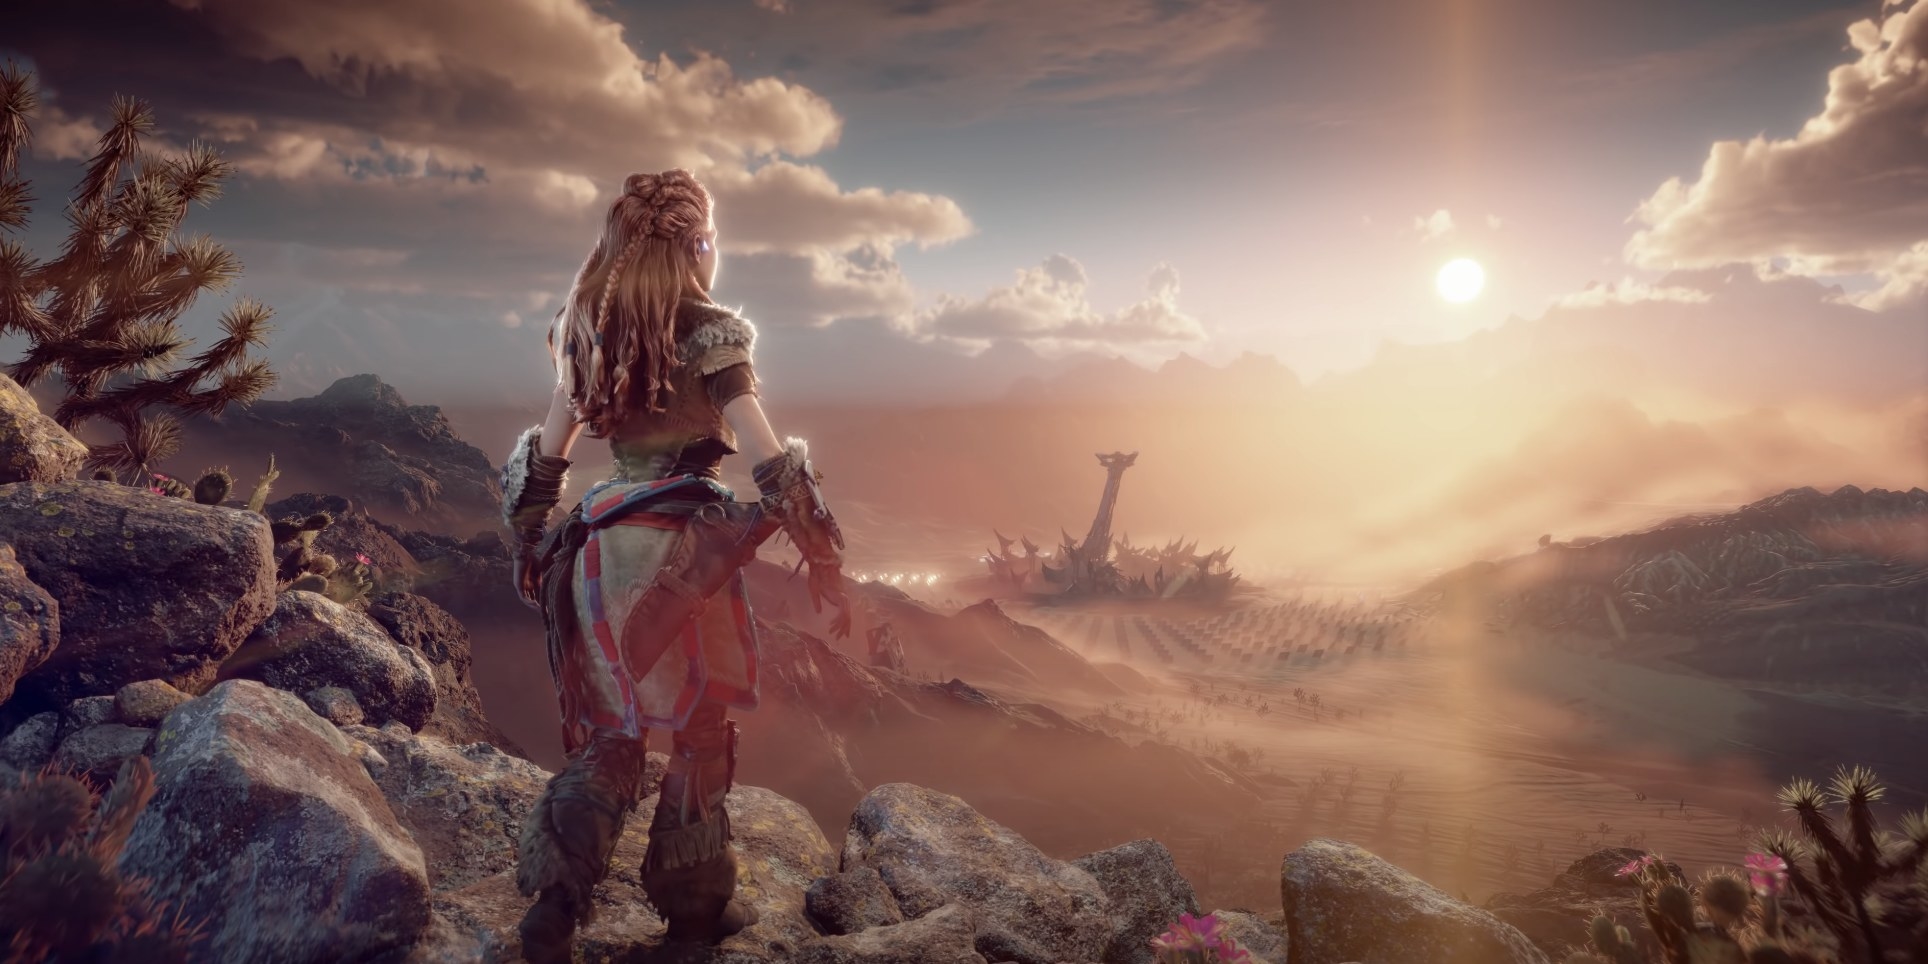 A red-haired woman stands on top of a large mountain, looking over a desert.